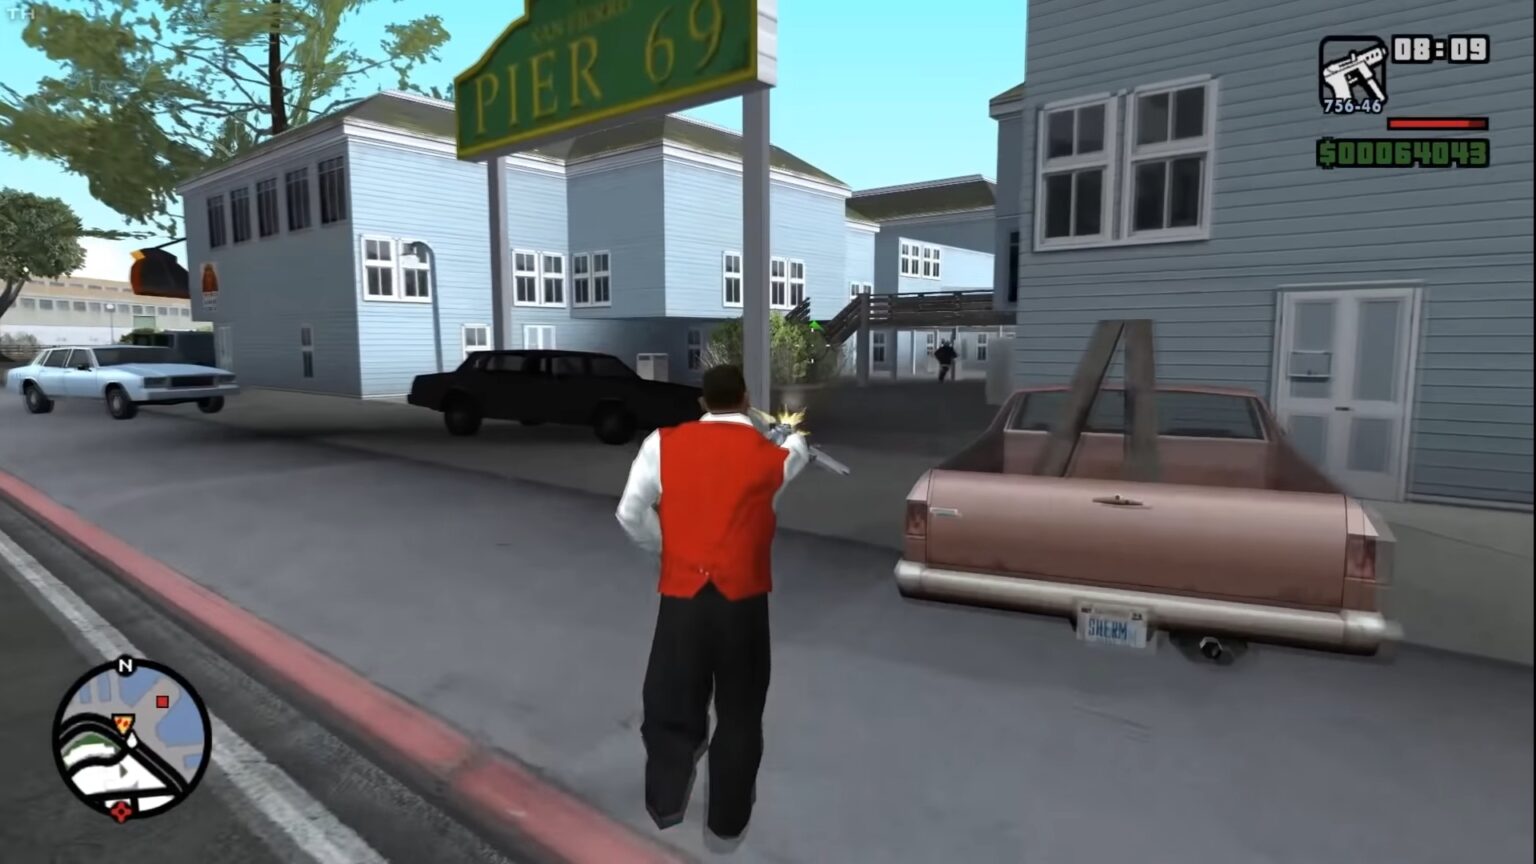 gta 5 highly compressed game in 3mb for pc